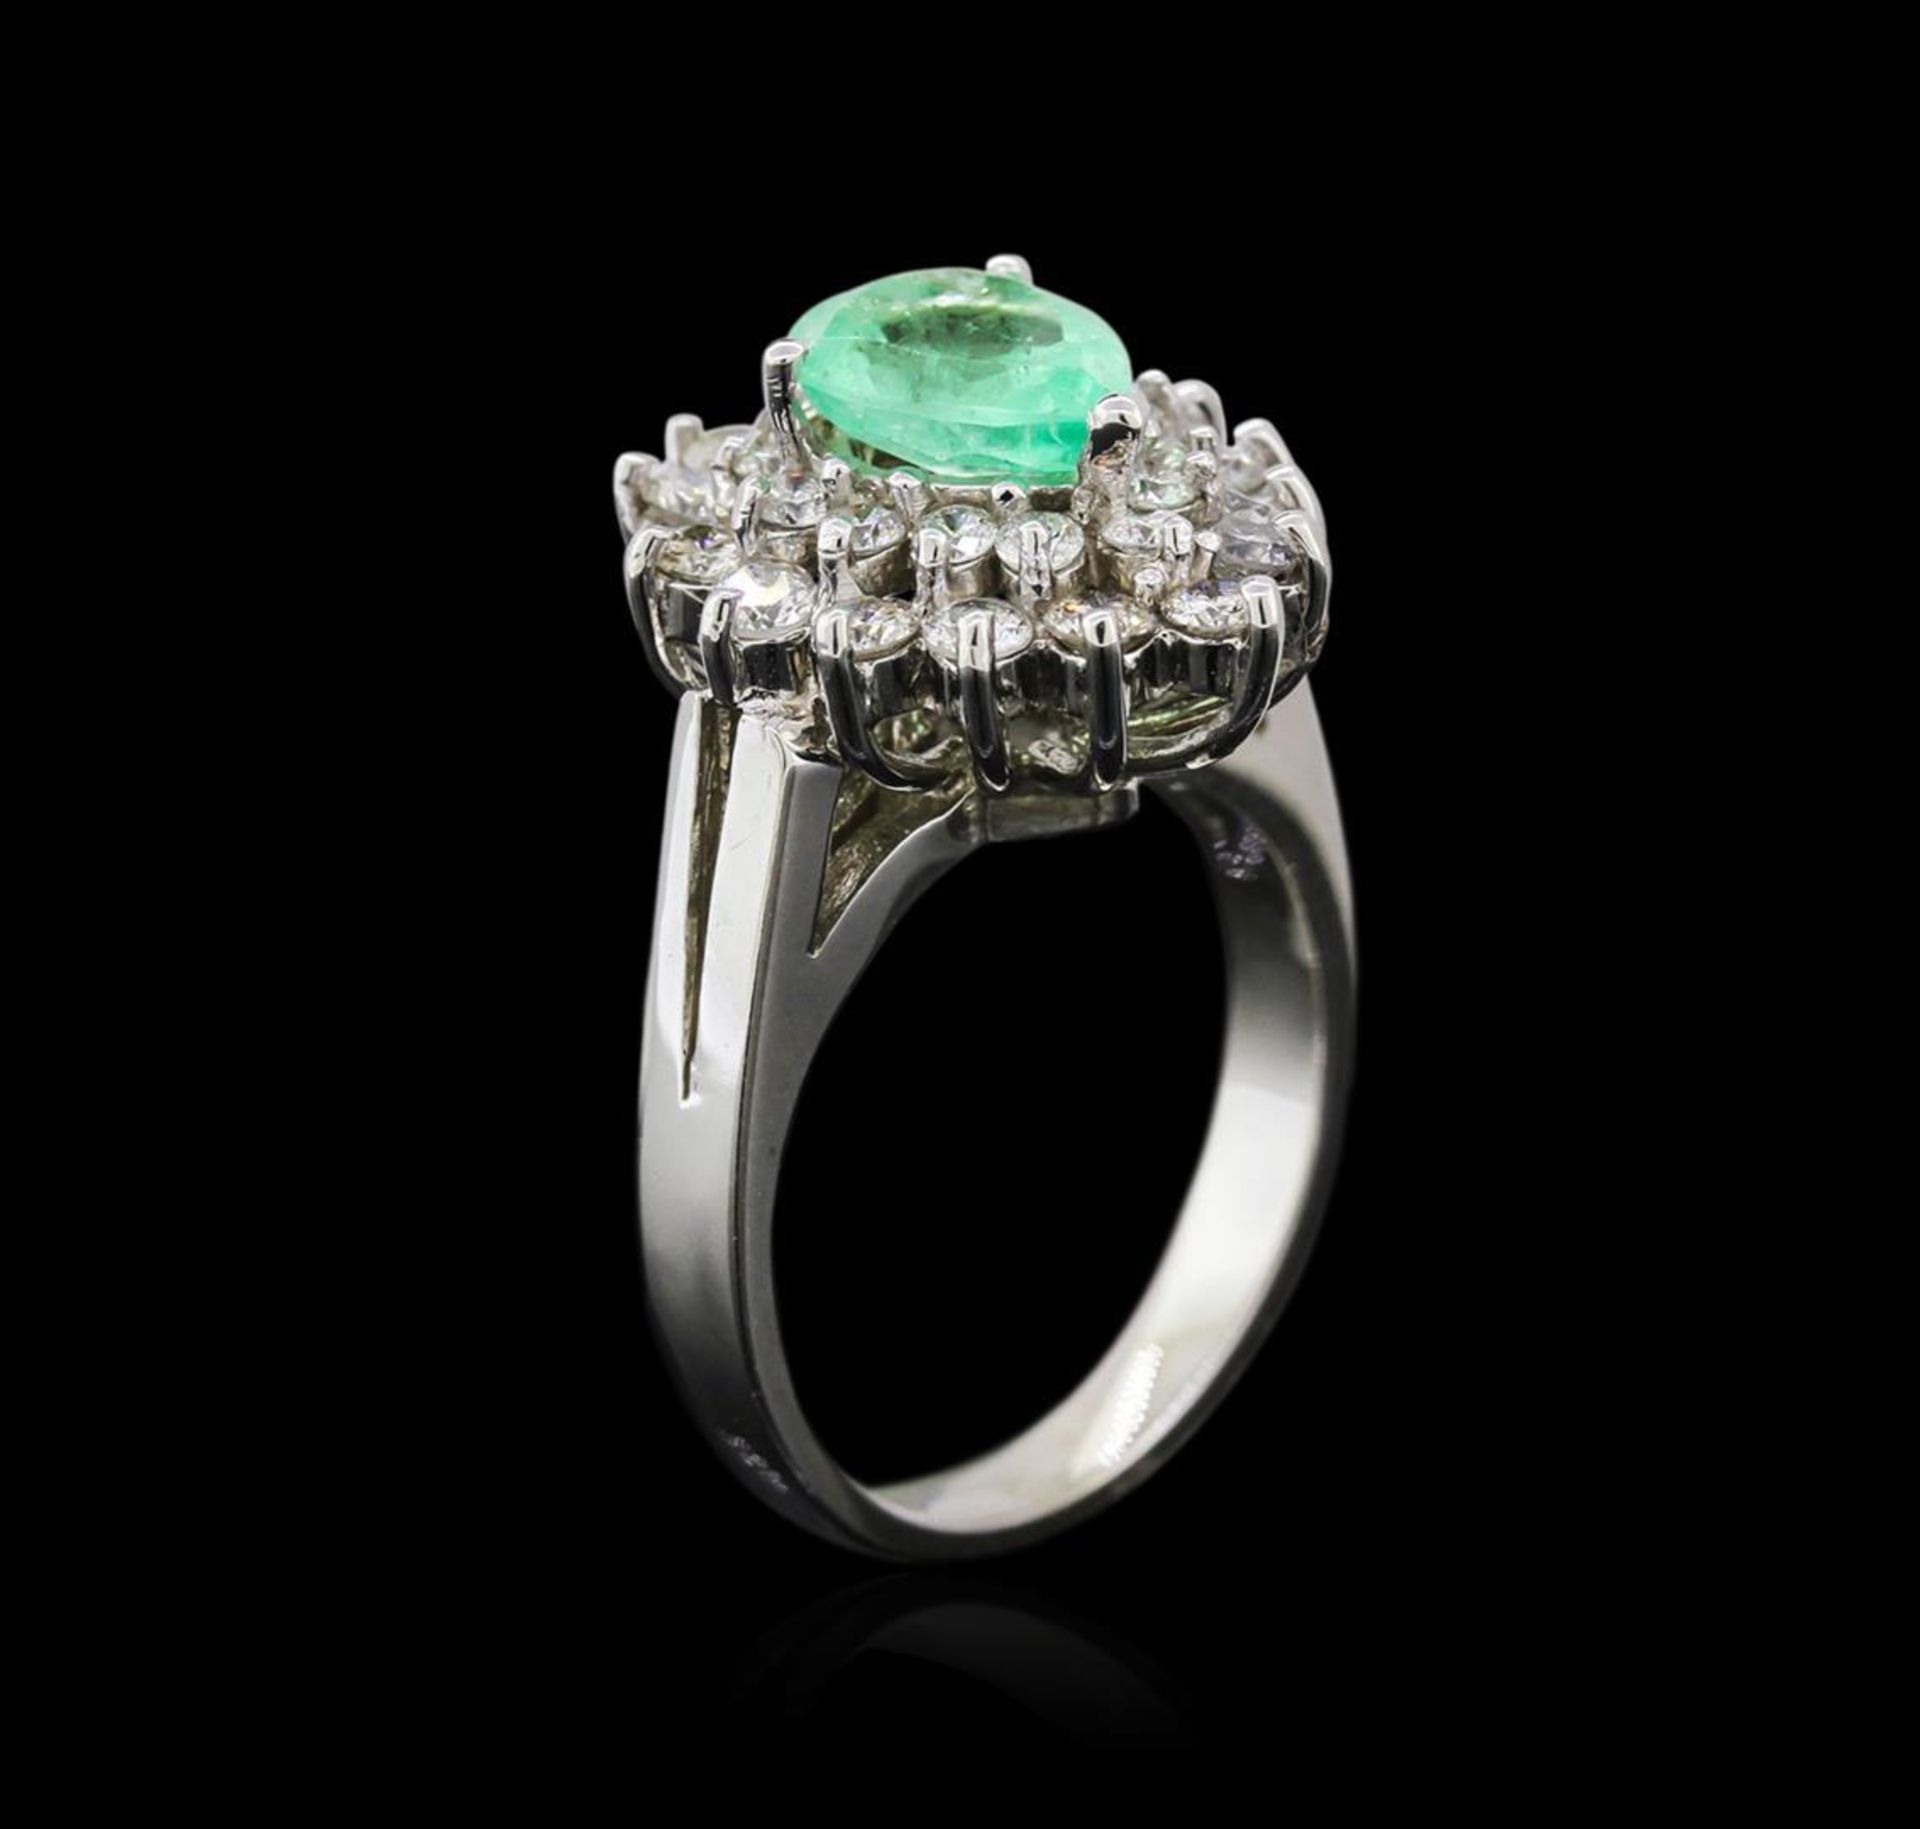 14KT White Gold 1.39 ctw Emerald and Diamond Ring - Image 3 of 4